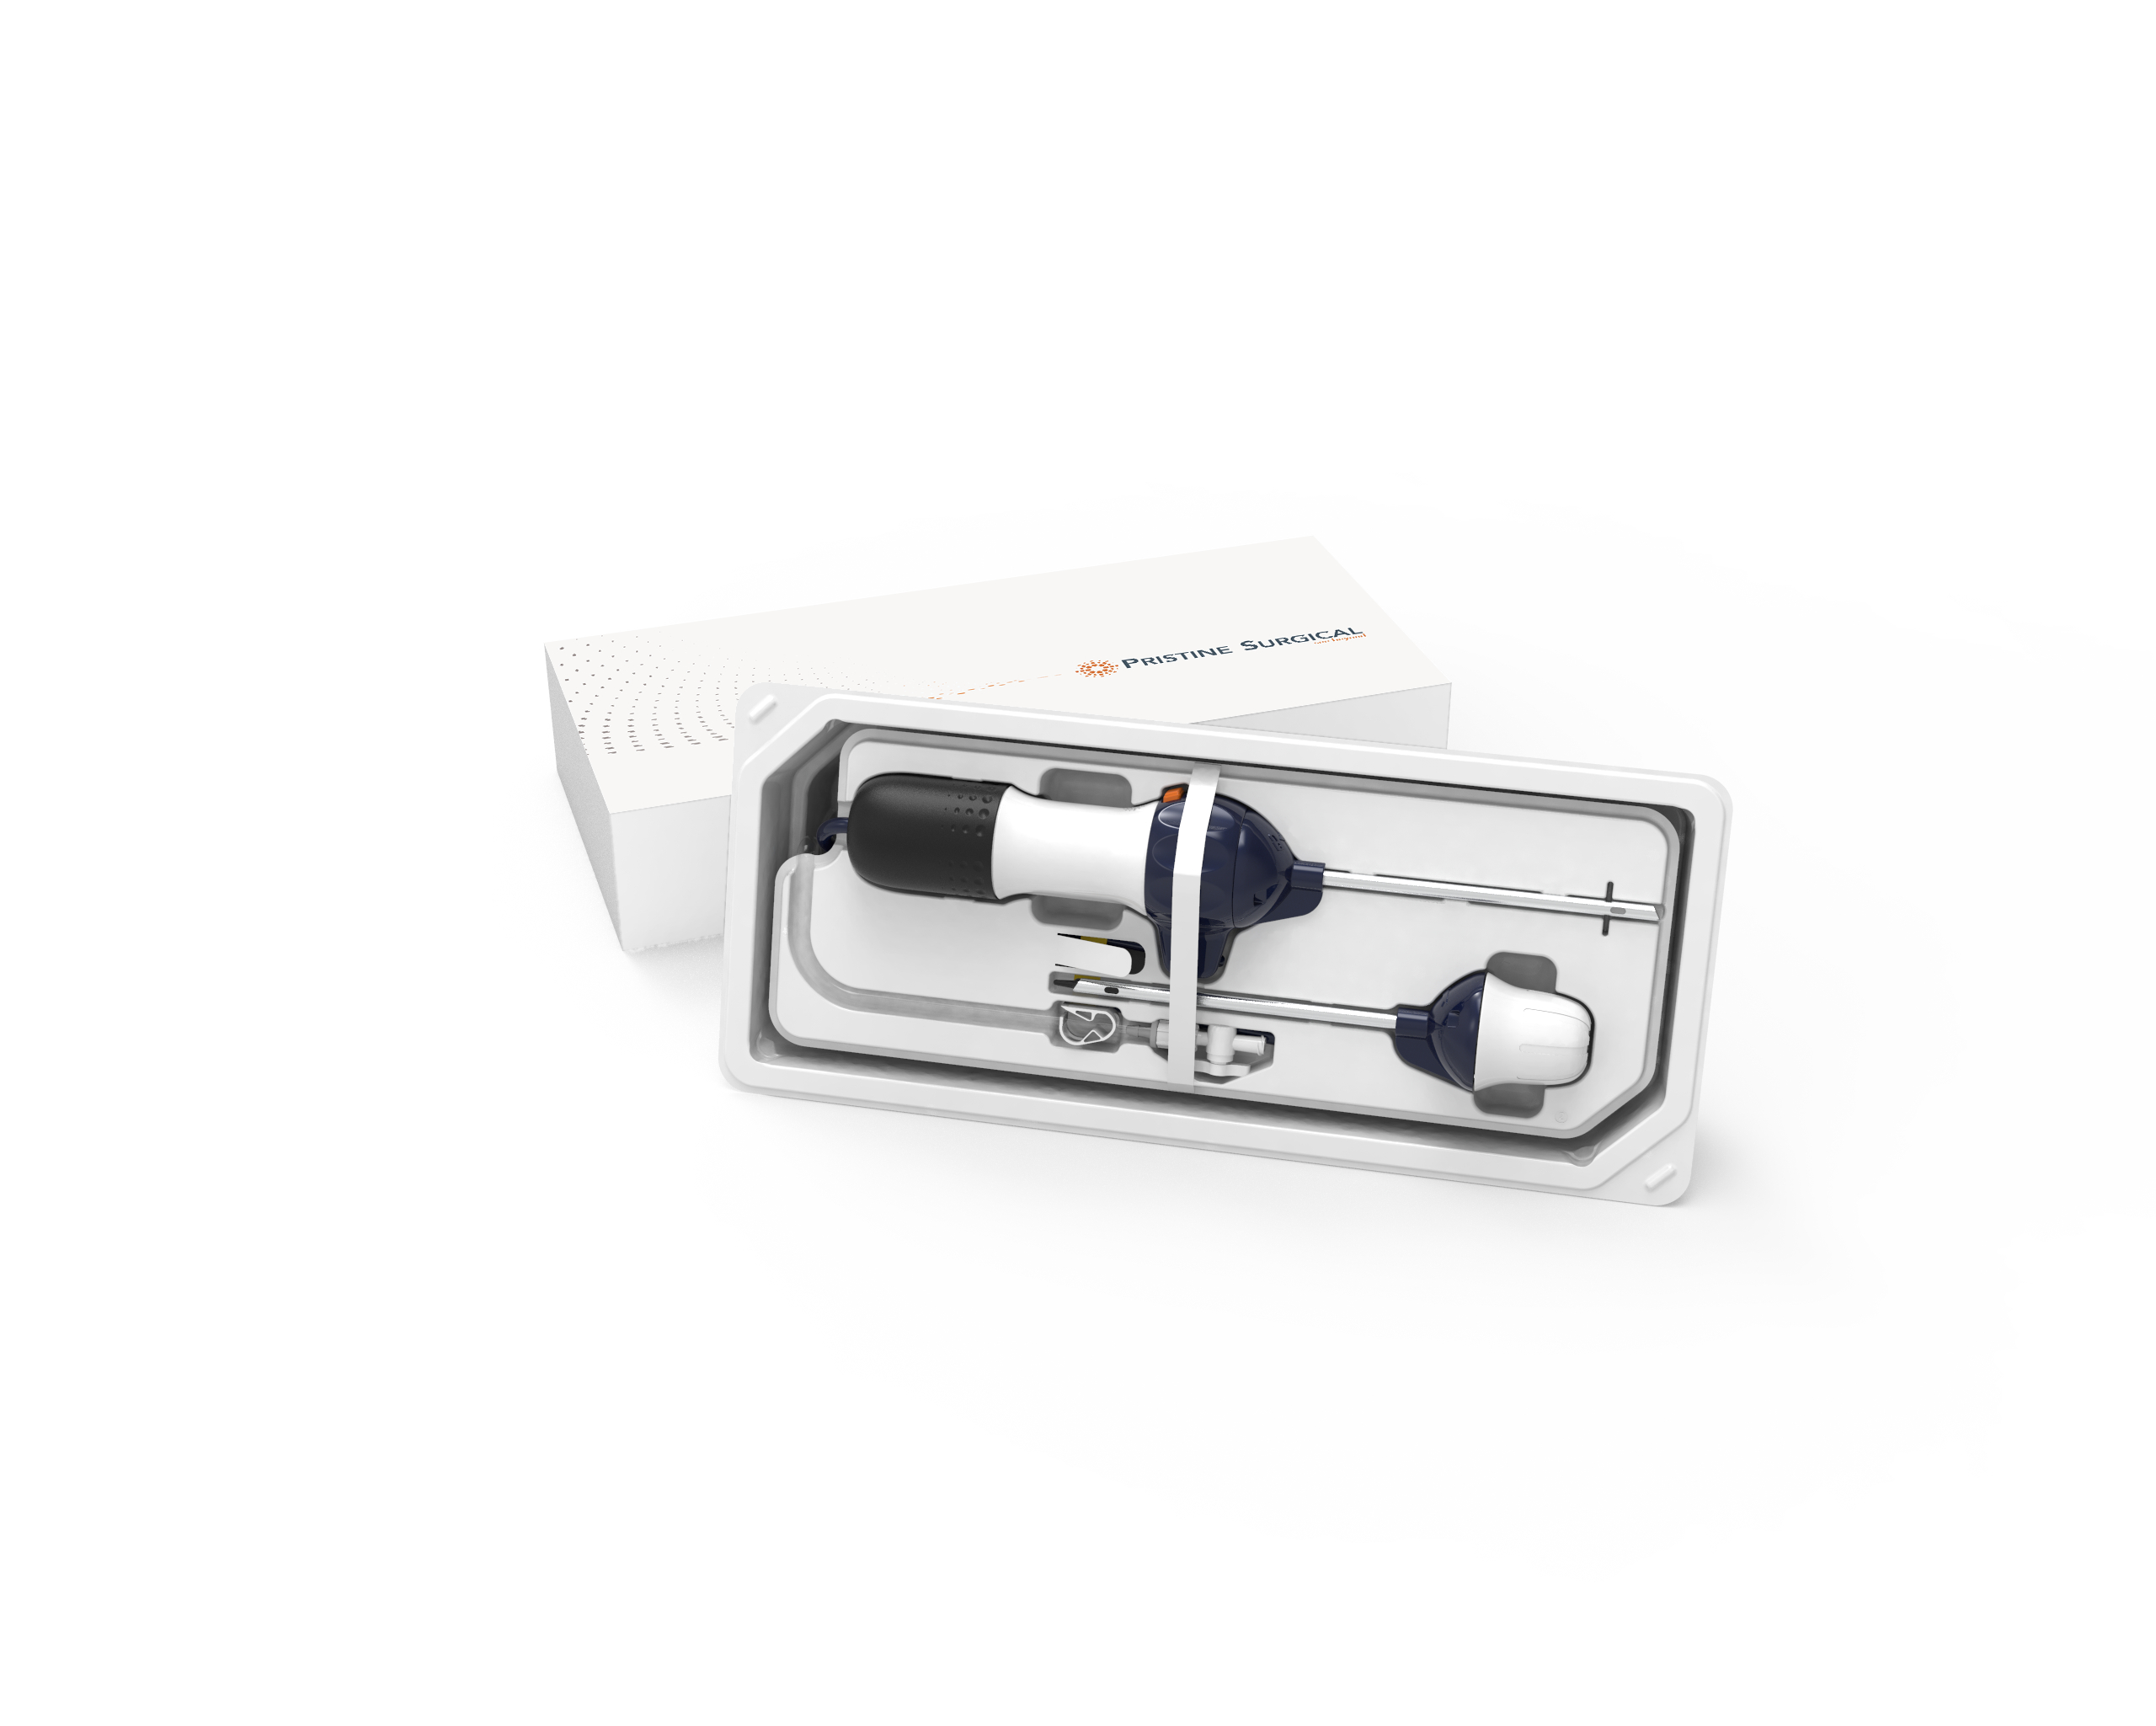 Pristine Surgical Receives FDA 510(k) Clearance for Summit™, the 